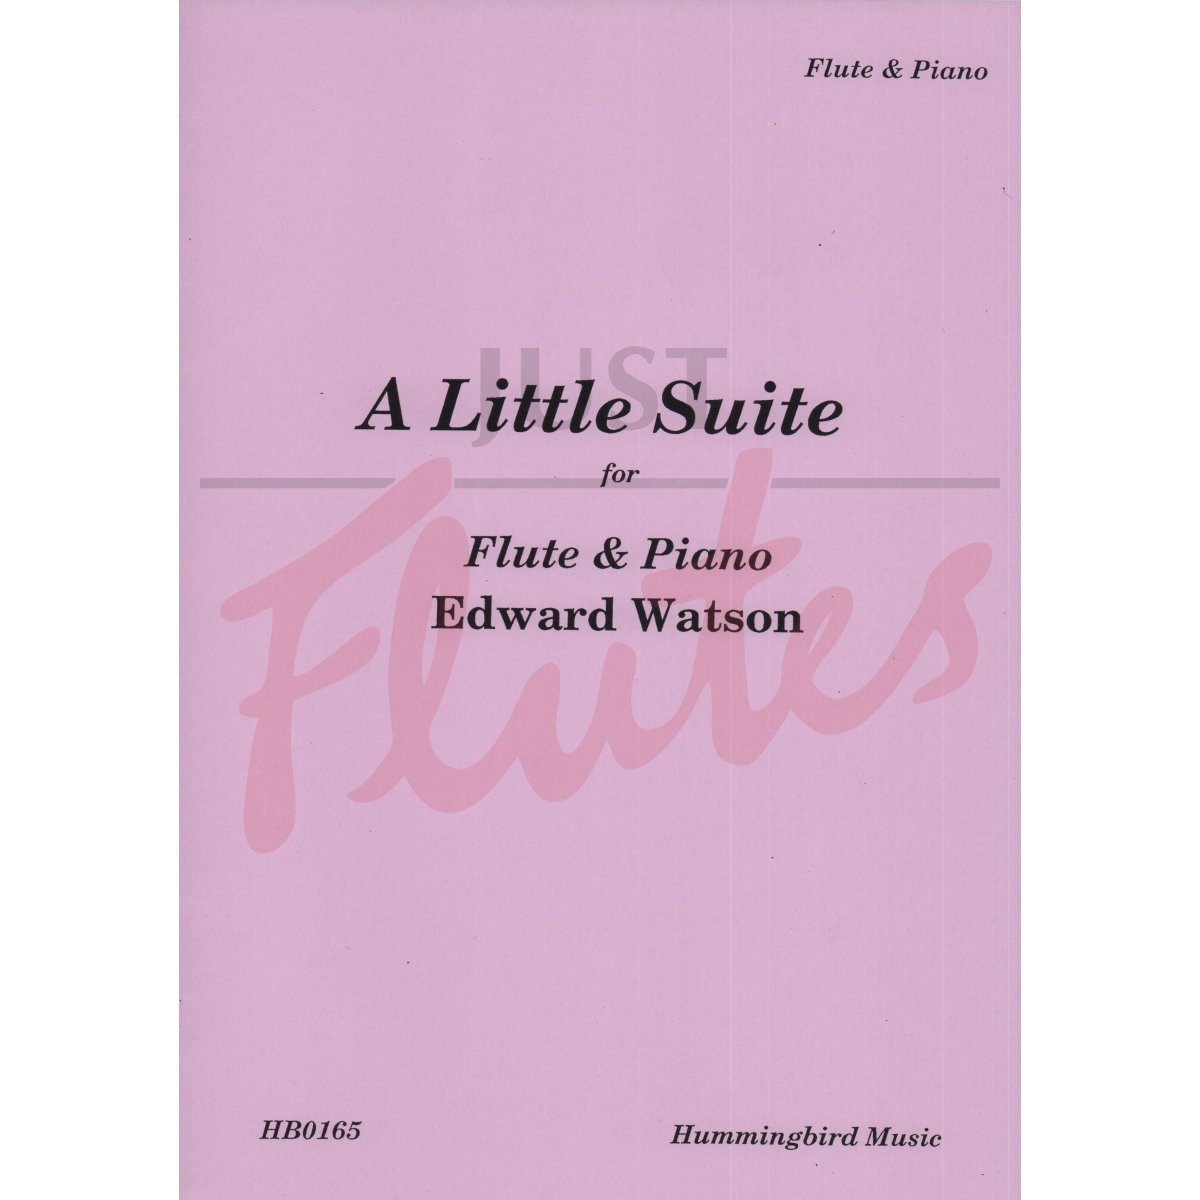 A Little Suite for Flute and Piano